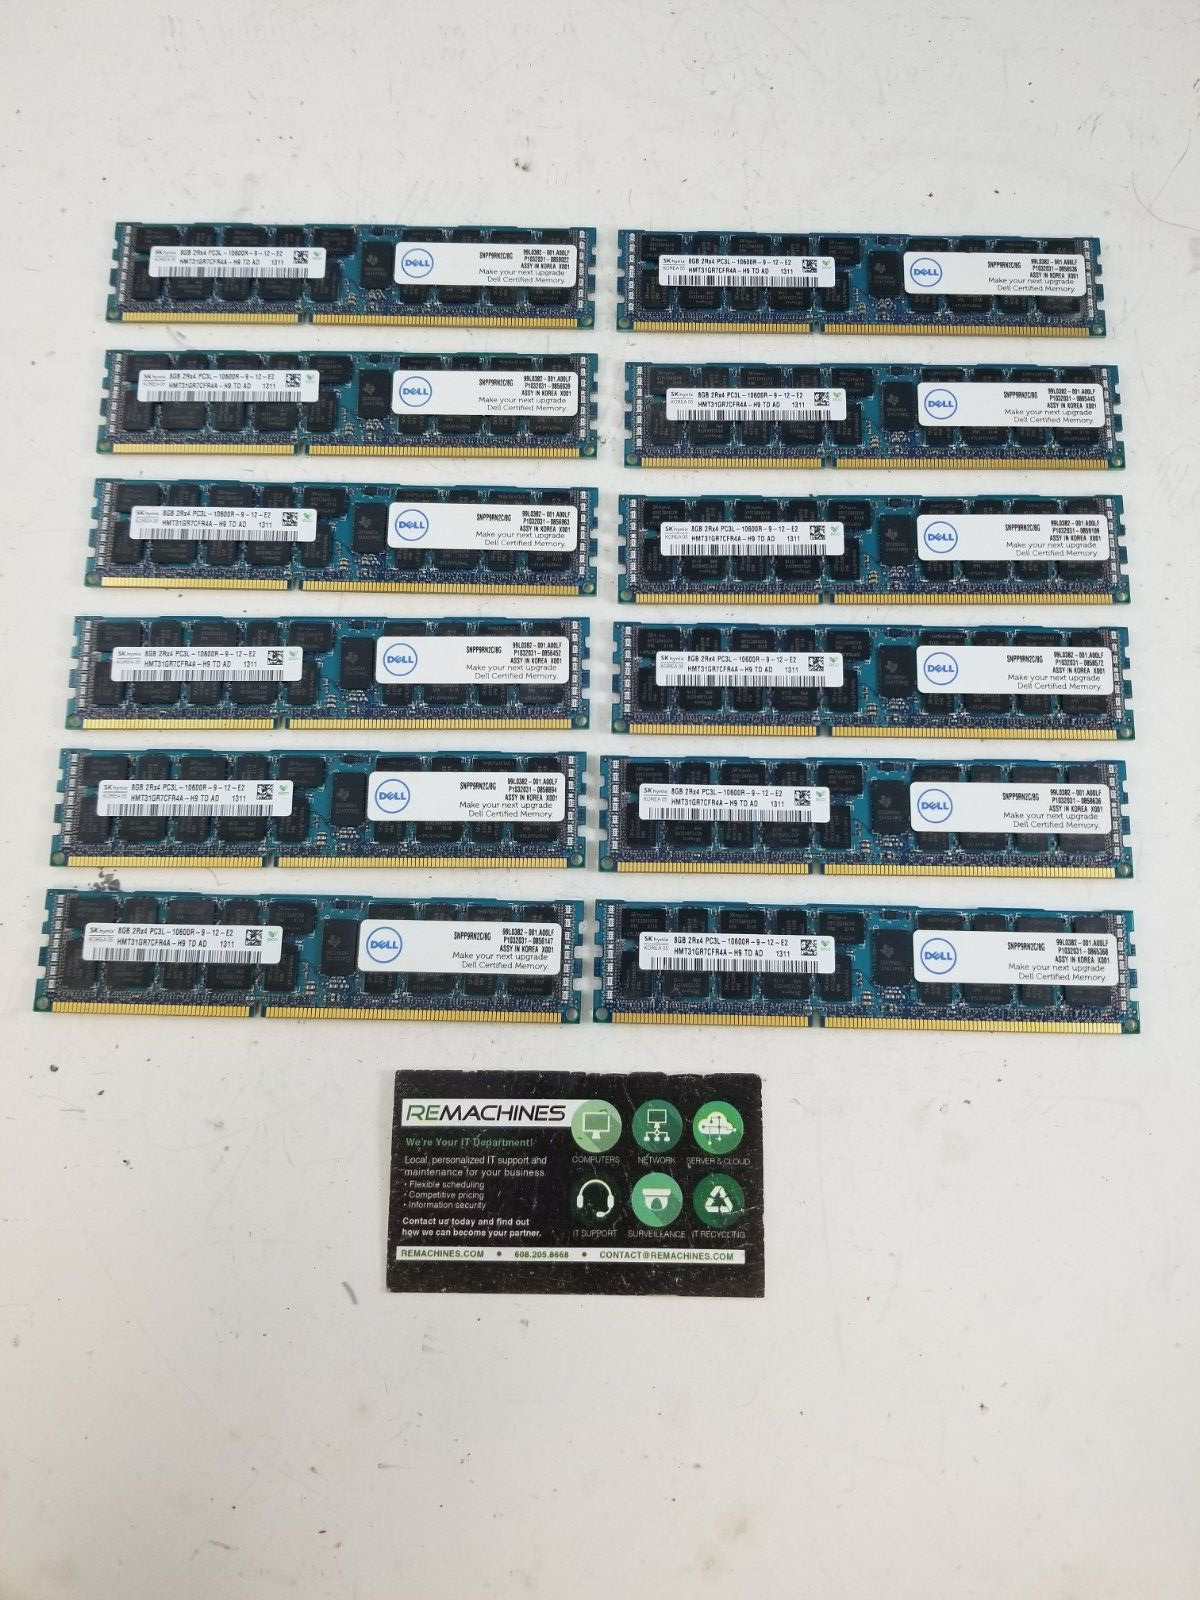 SK Hynix 96GB 12x8GB PC3L-10600R DDR3-1333 ECC Memory SNPP9RN2C/8G TESTED FS